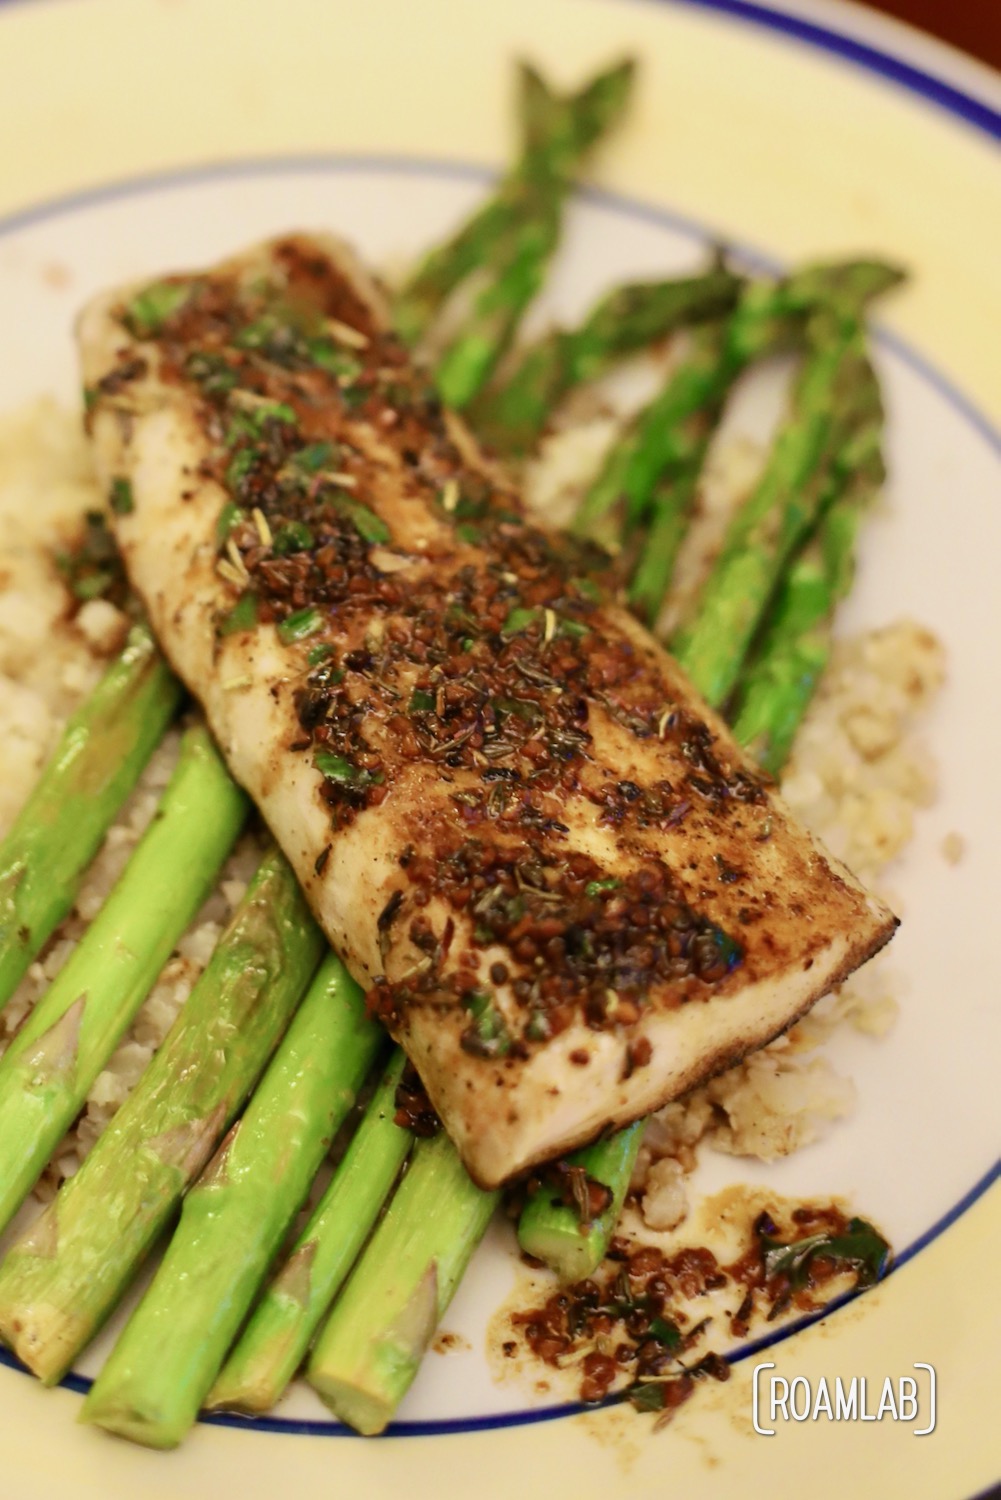 Savor this dense, meaty white fish recipe with a rich and garlicky sauce in our lemon butter mahi mahi and asparagus campfire cooking dinner recipe.